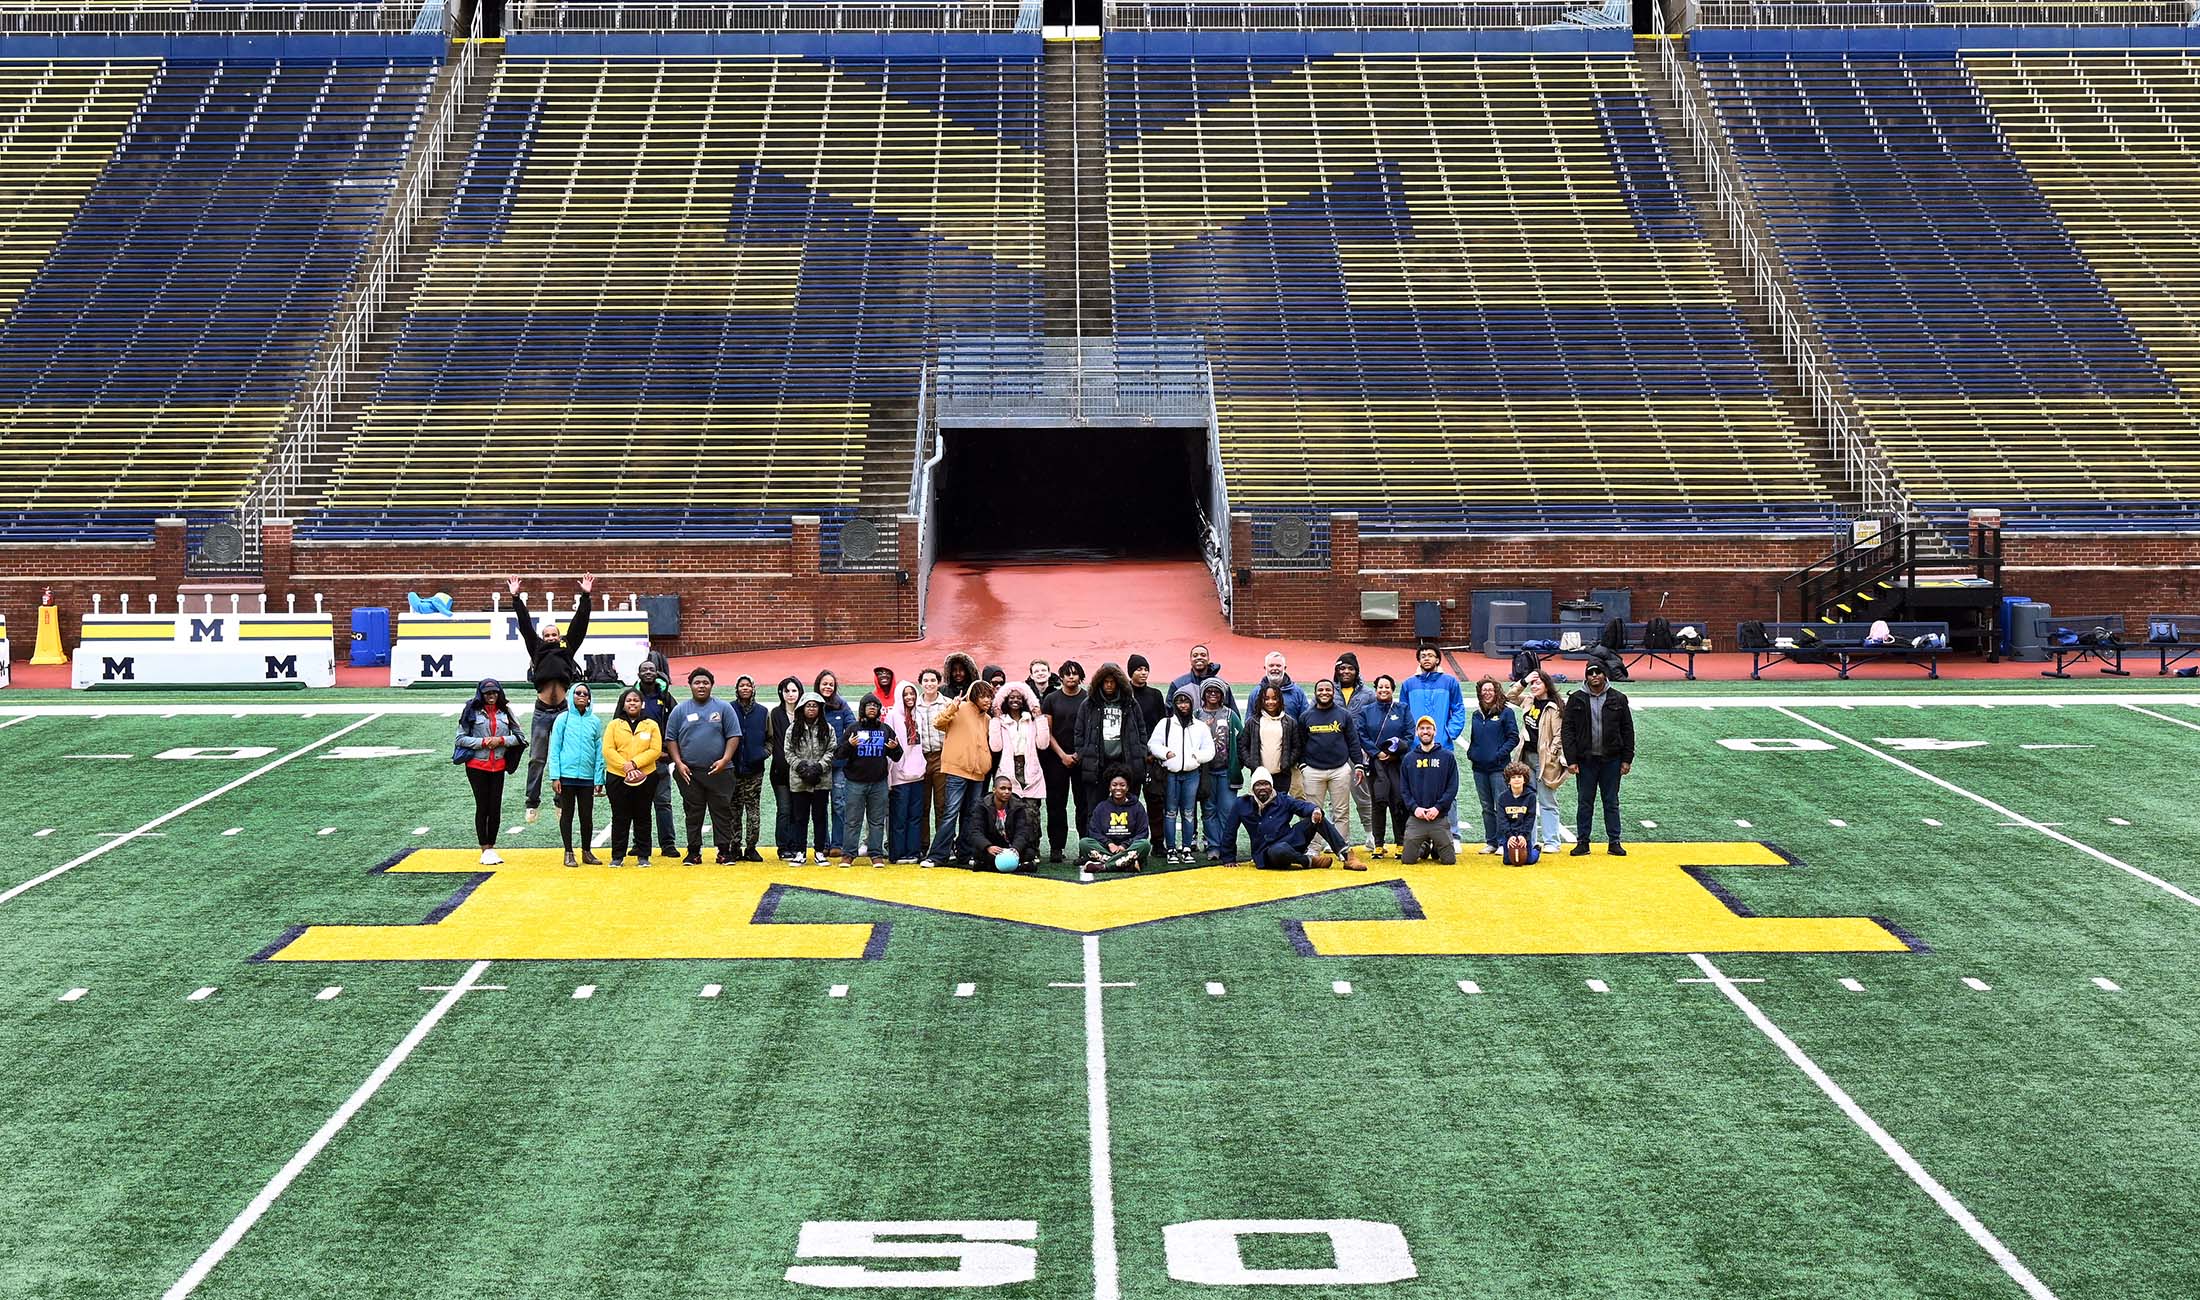 A large group of people take a photo standing on the Michigan M at the 50 yard line in Michigan stadium.